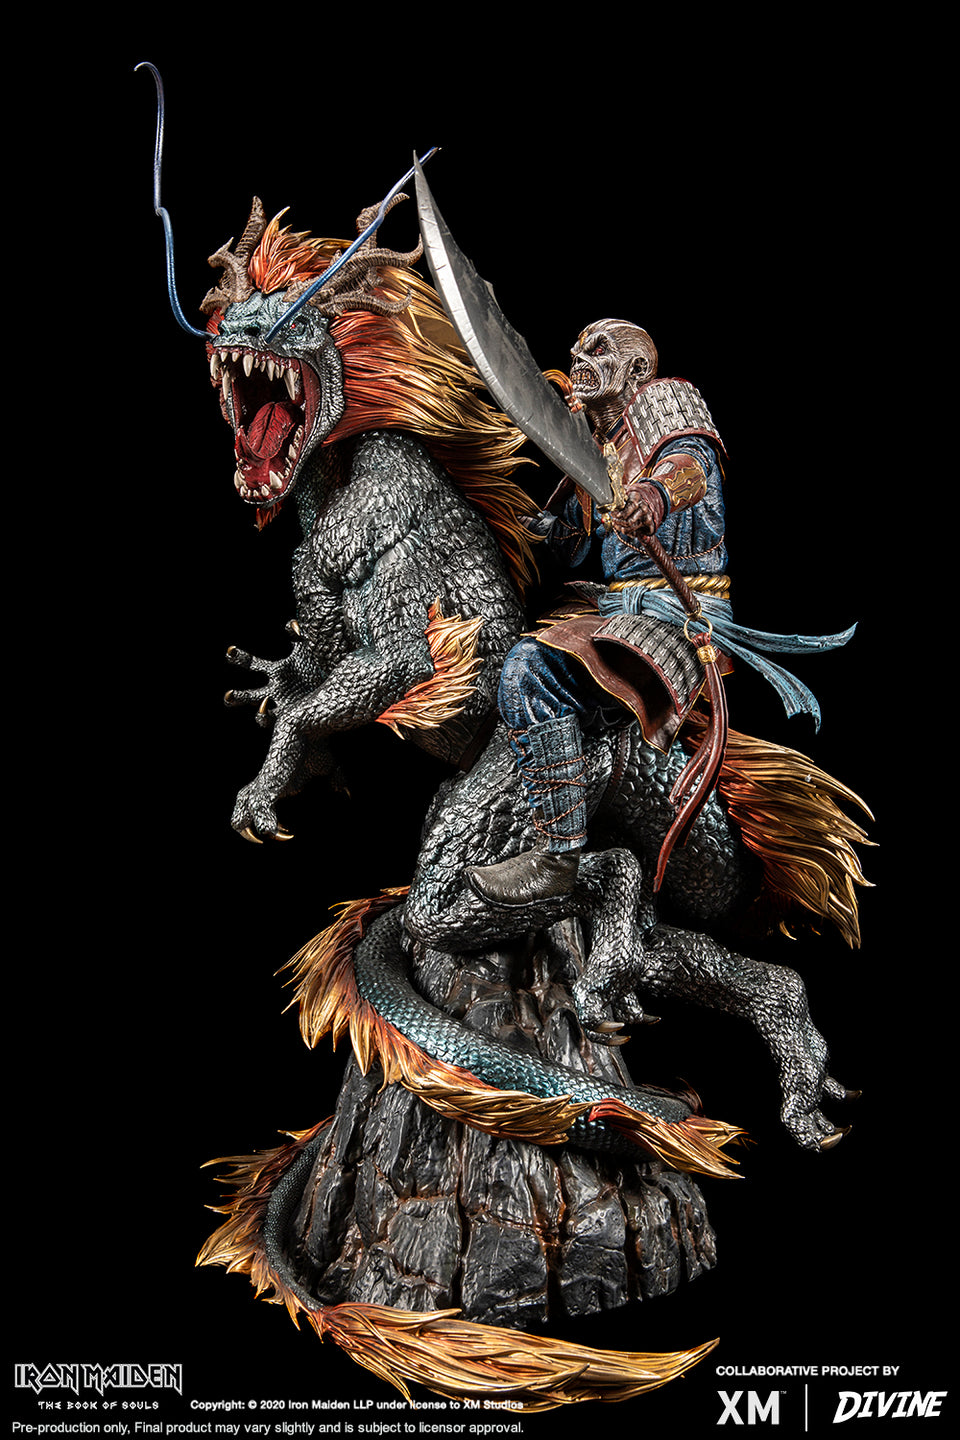 XM Studios Eddie X The Chinese Dragon 2016 The Book Of Souls World Tour 1:4 Scale Statue